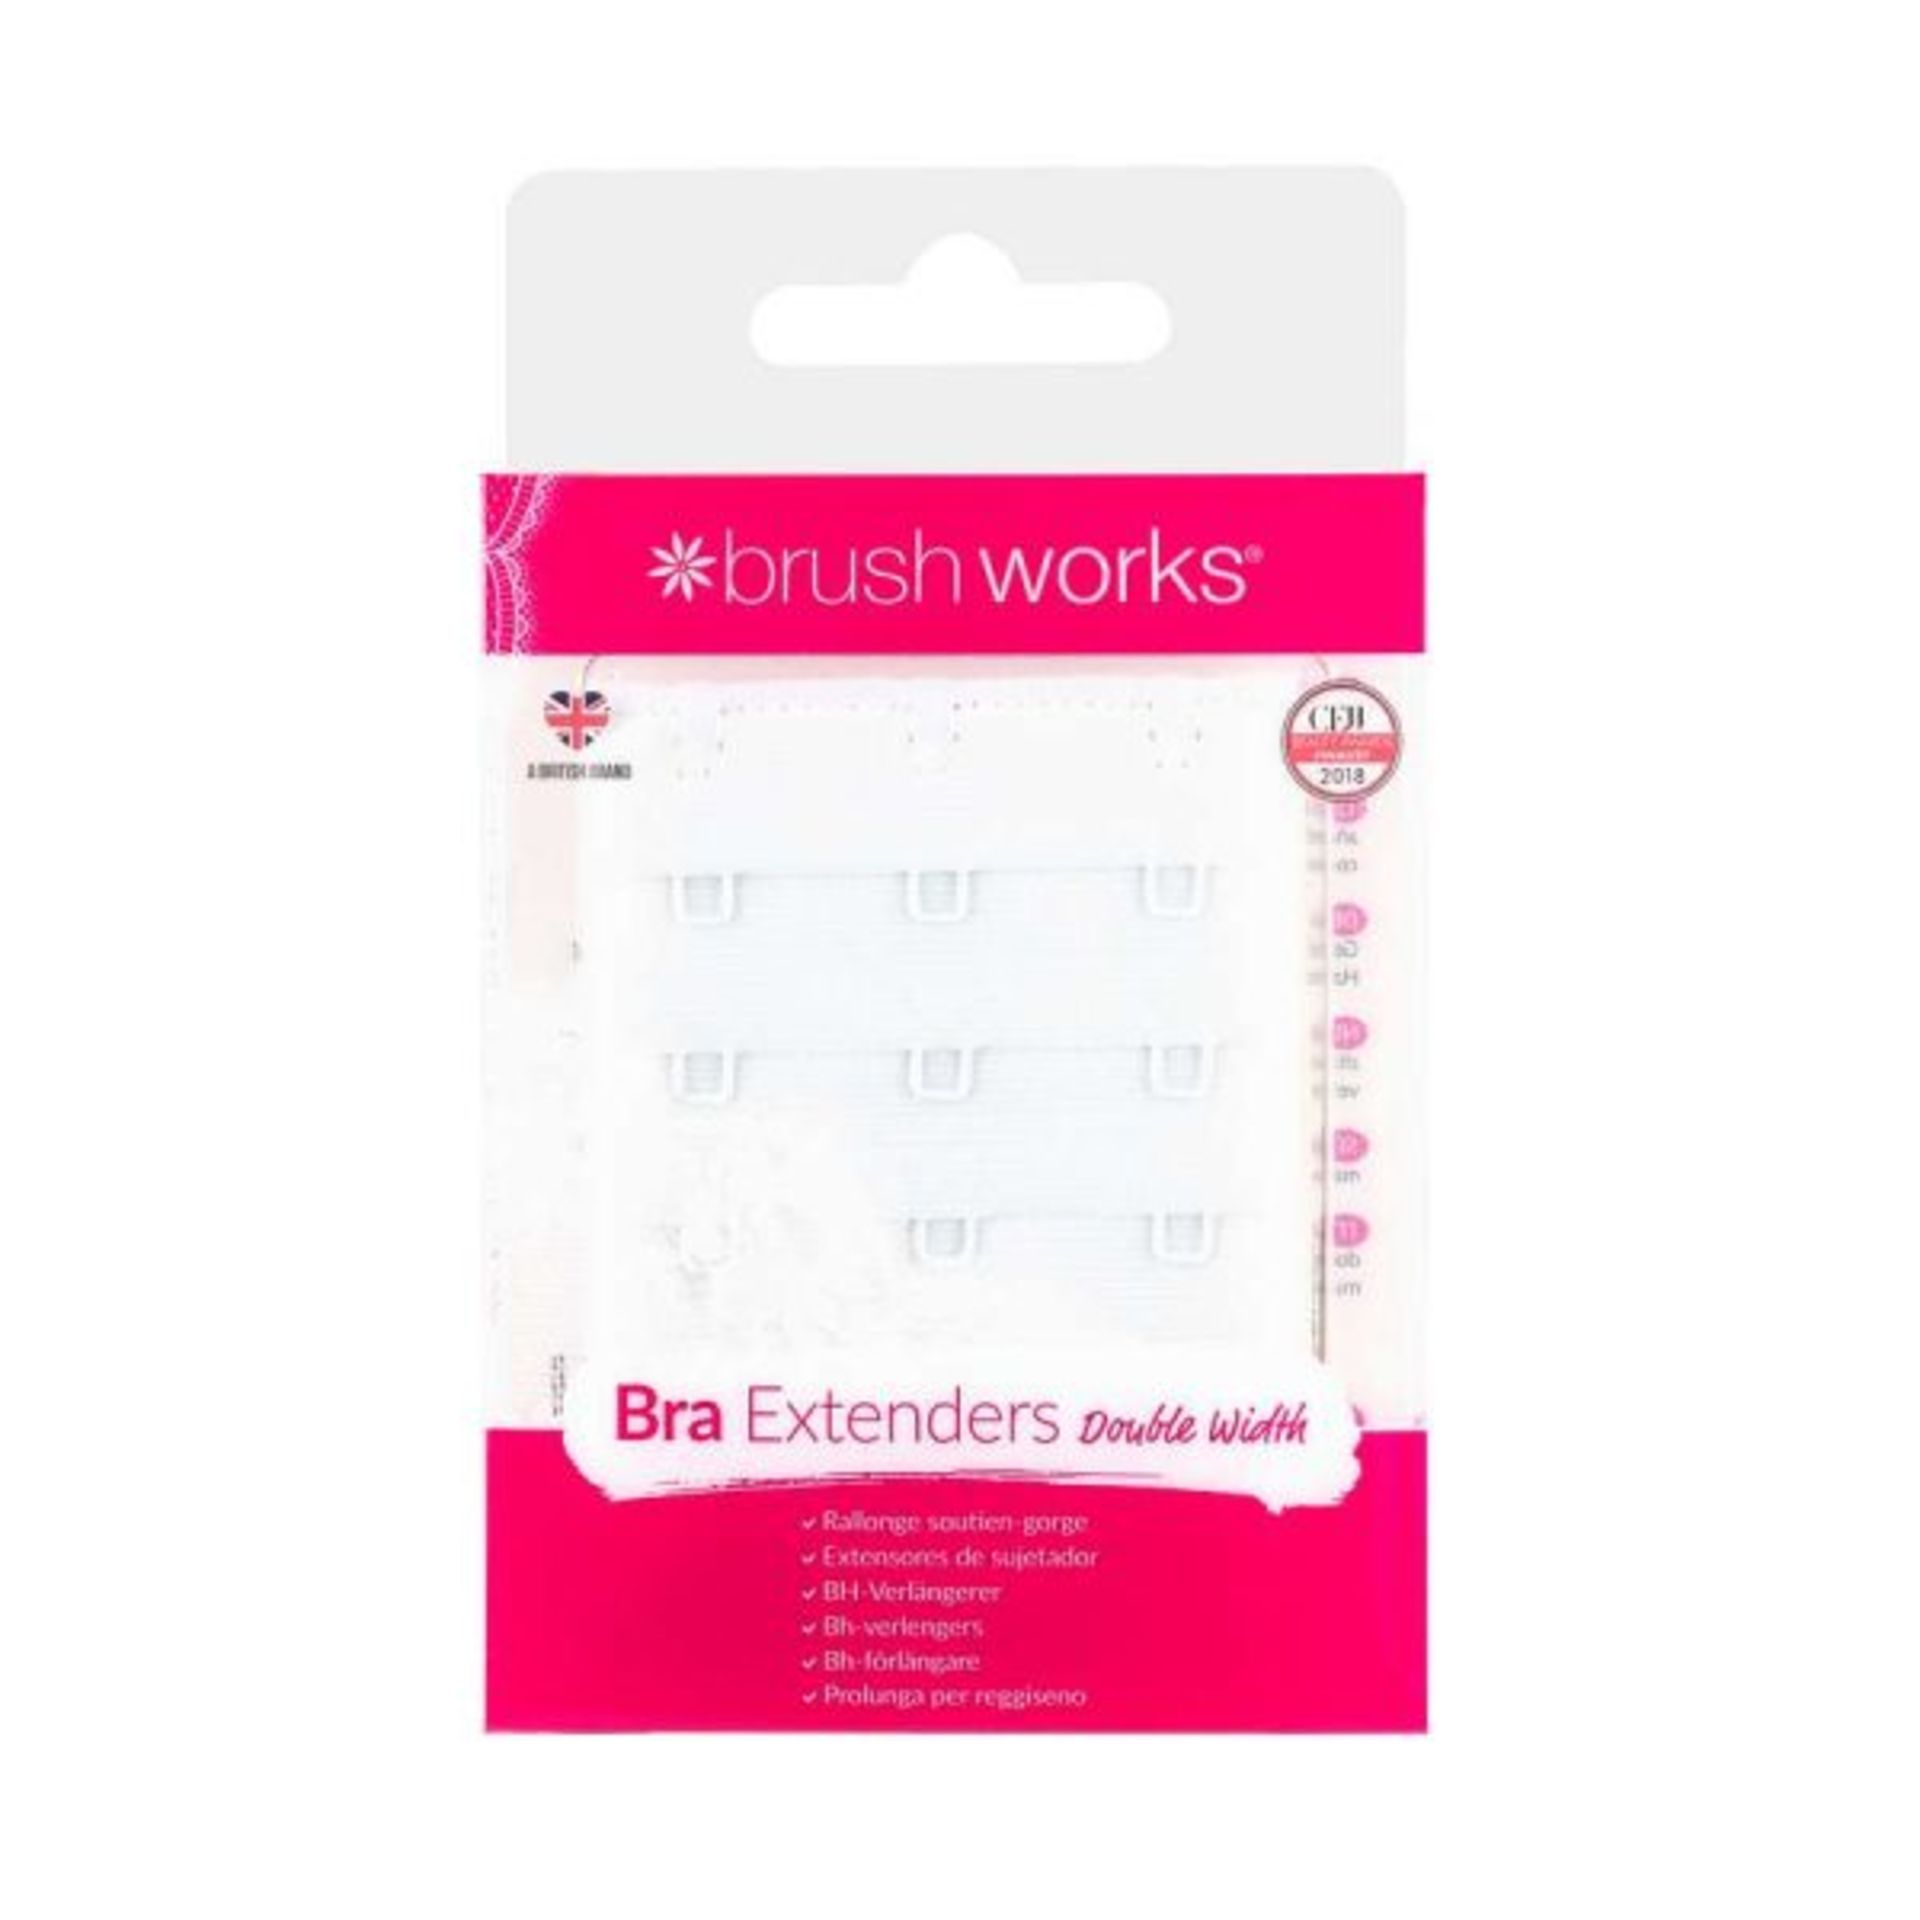 833 X NEW BW DOUBLE WIDTH BRA EXTENDERS - 3 PACK - Image 2 of 2